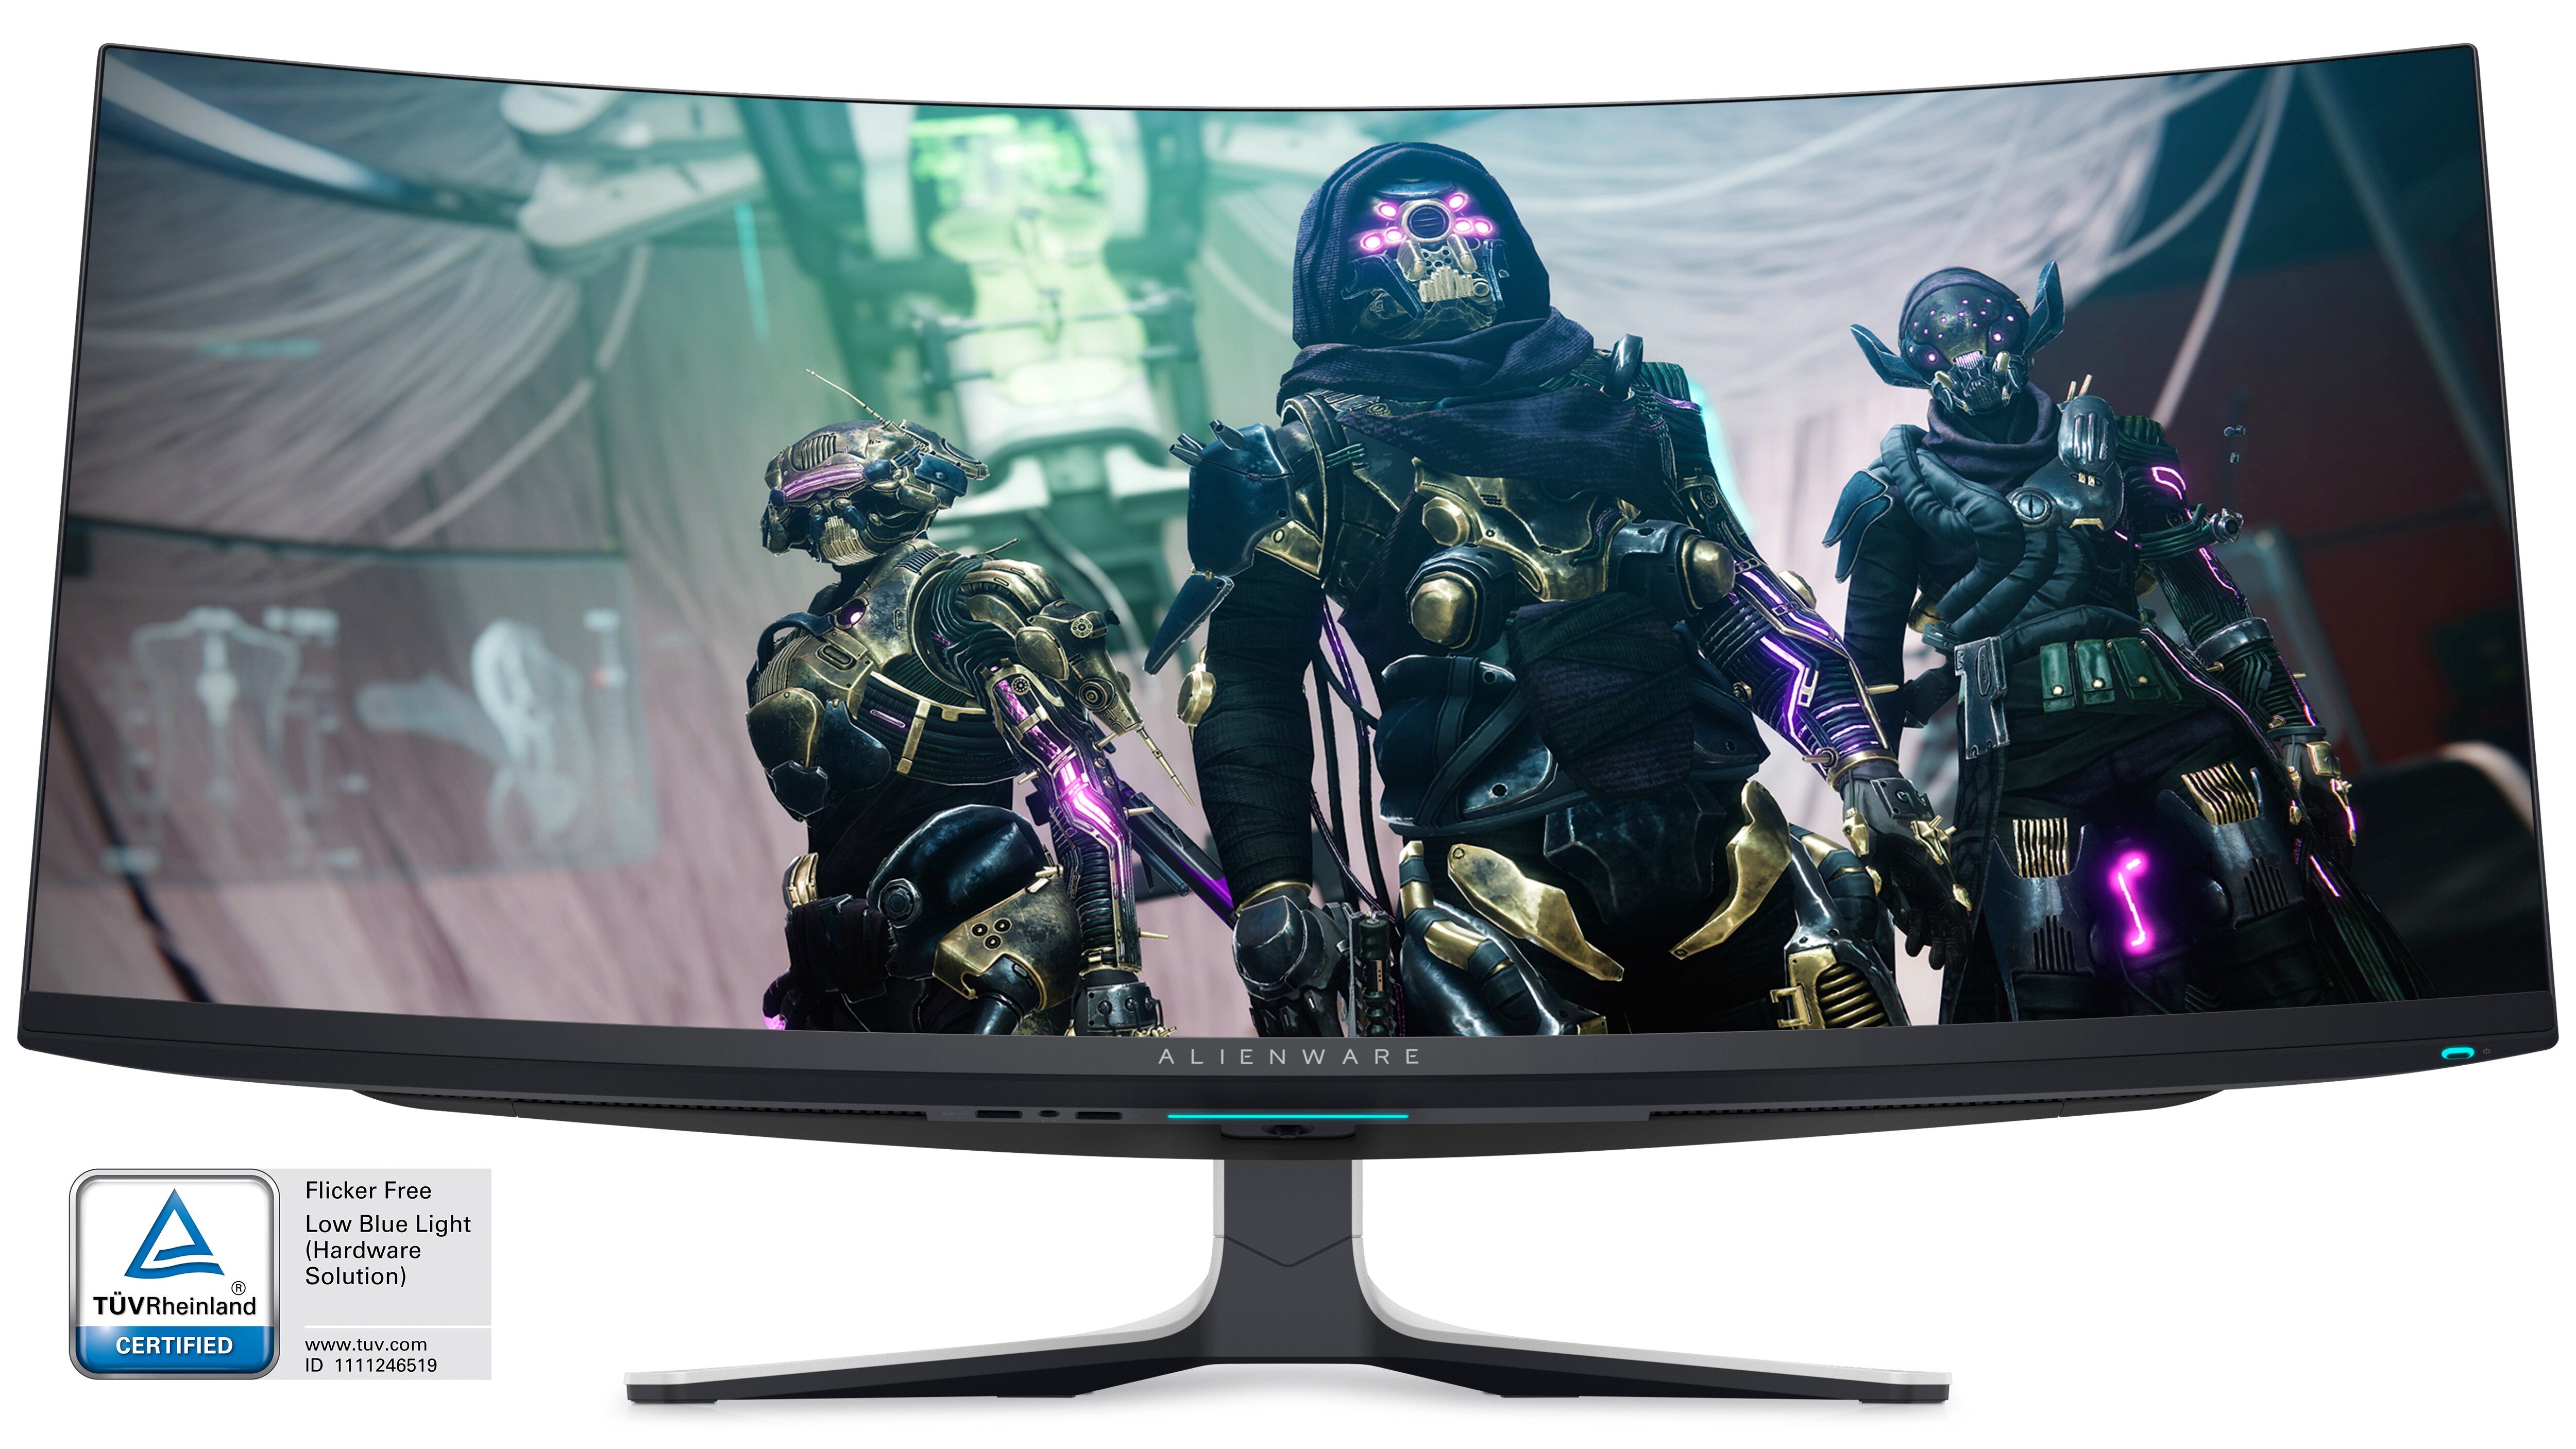 Alienware 34 Inch Curved QD-OLED Gaming Monitor - AW3423DW | Dell 